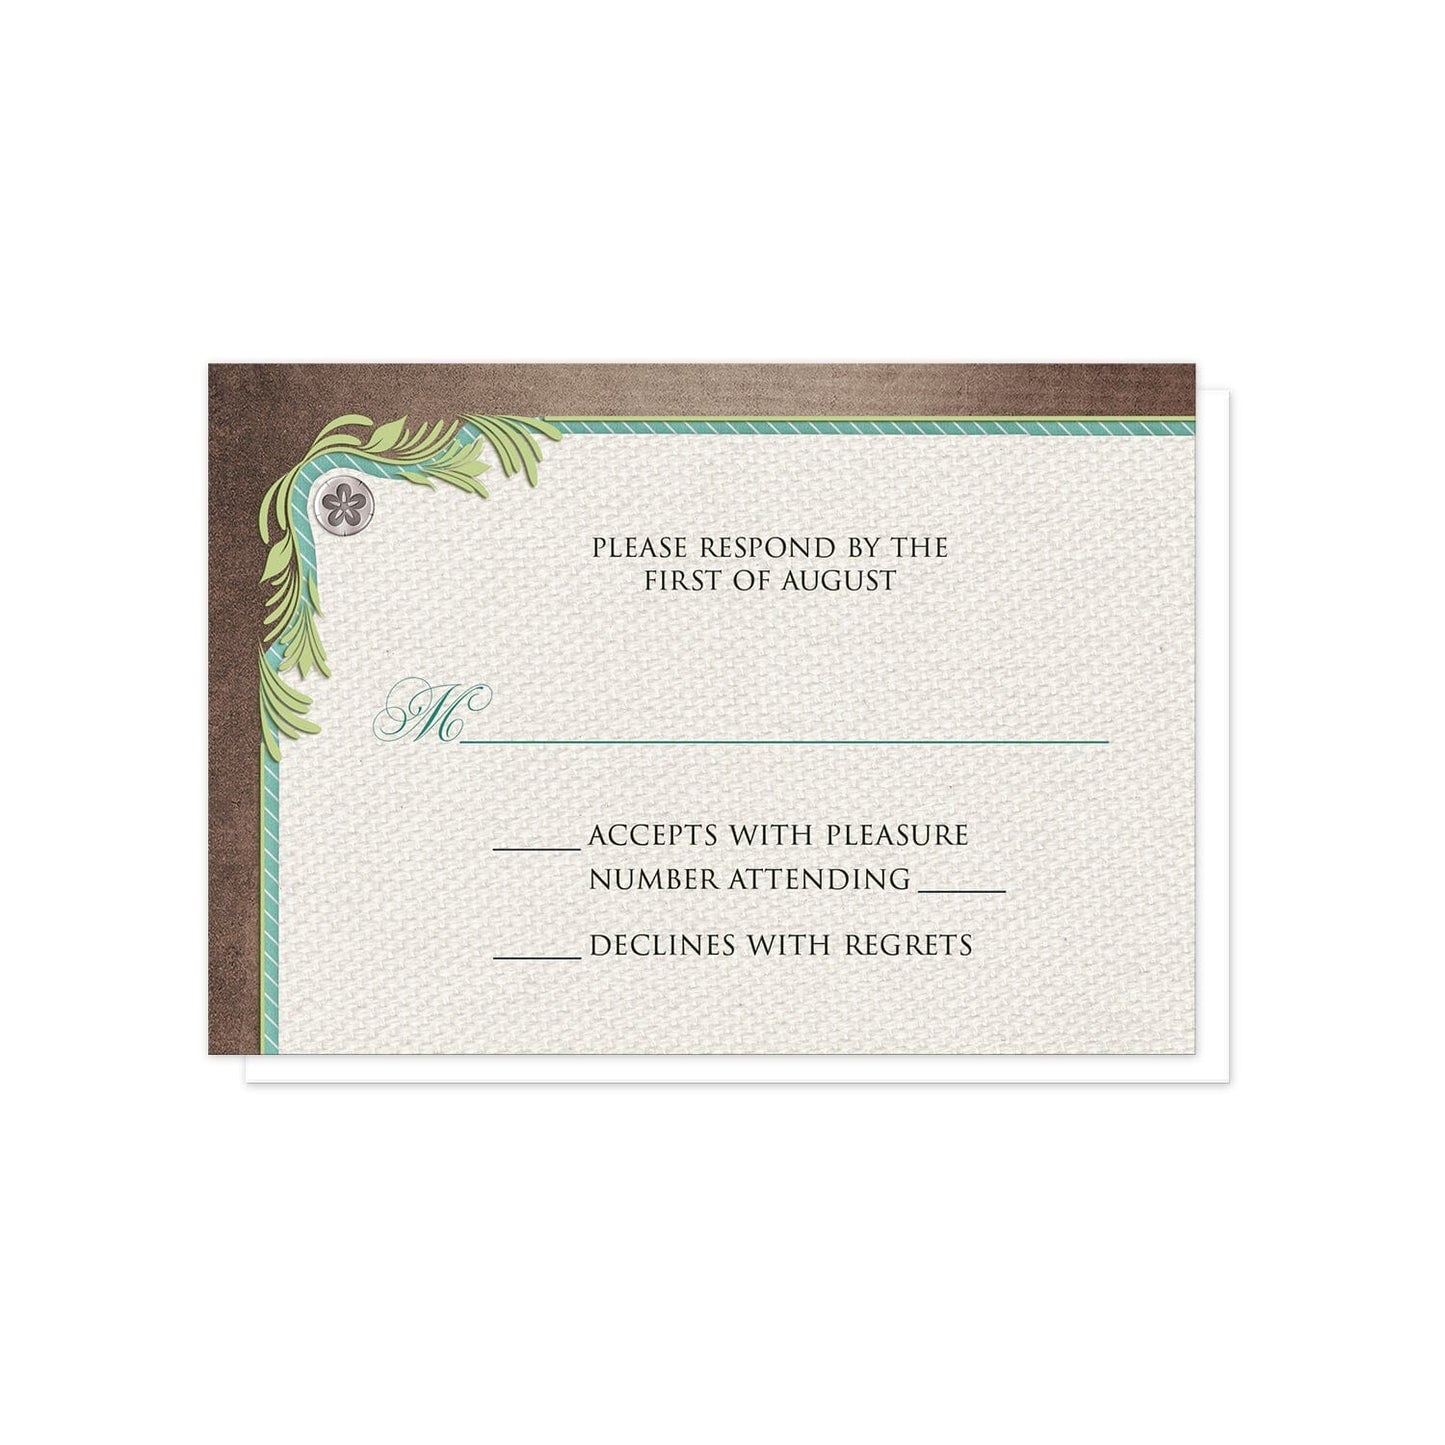 Rustic Succulent Garden RSVP Cards at Artistically Invited.